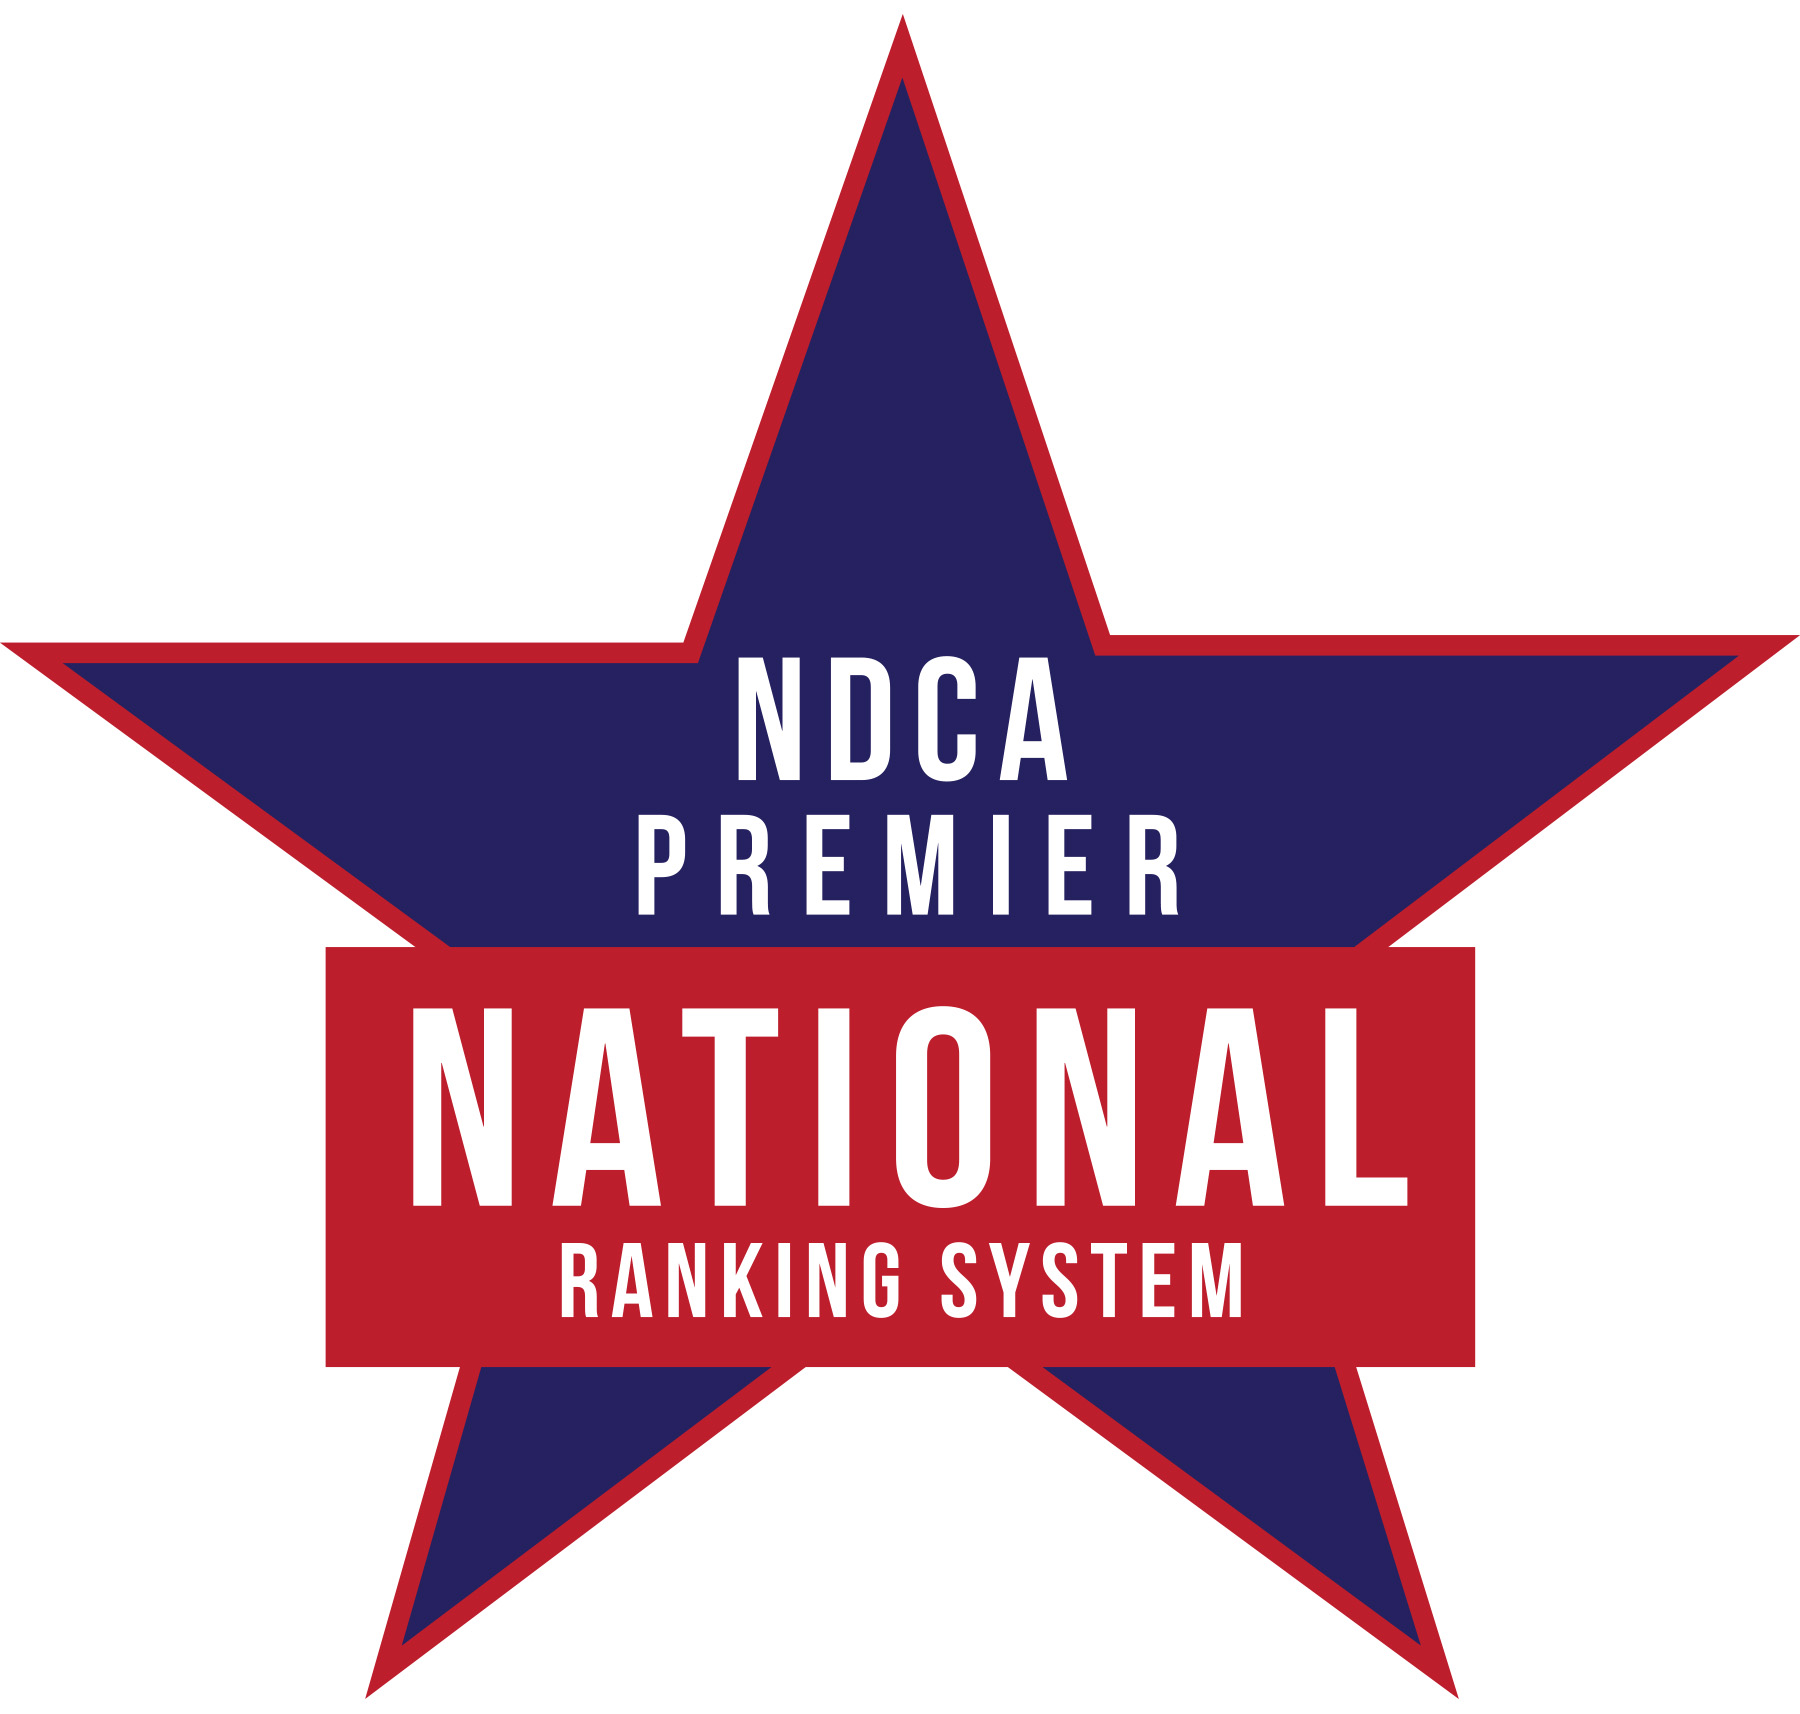 NDCA The National Dance Council of America